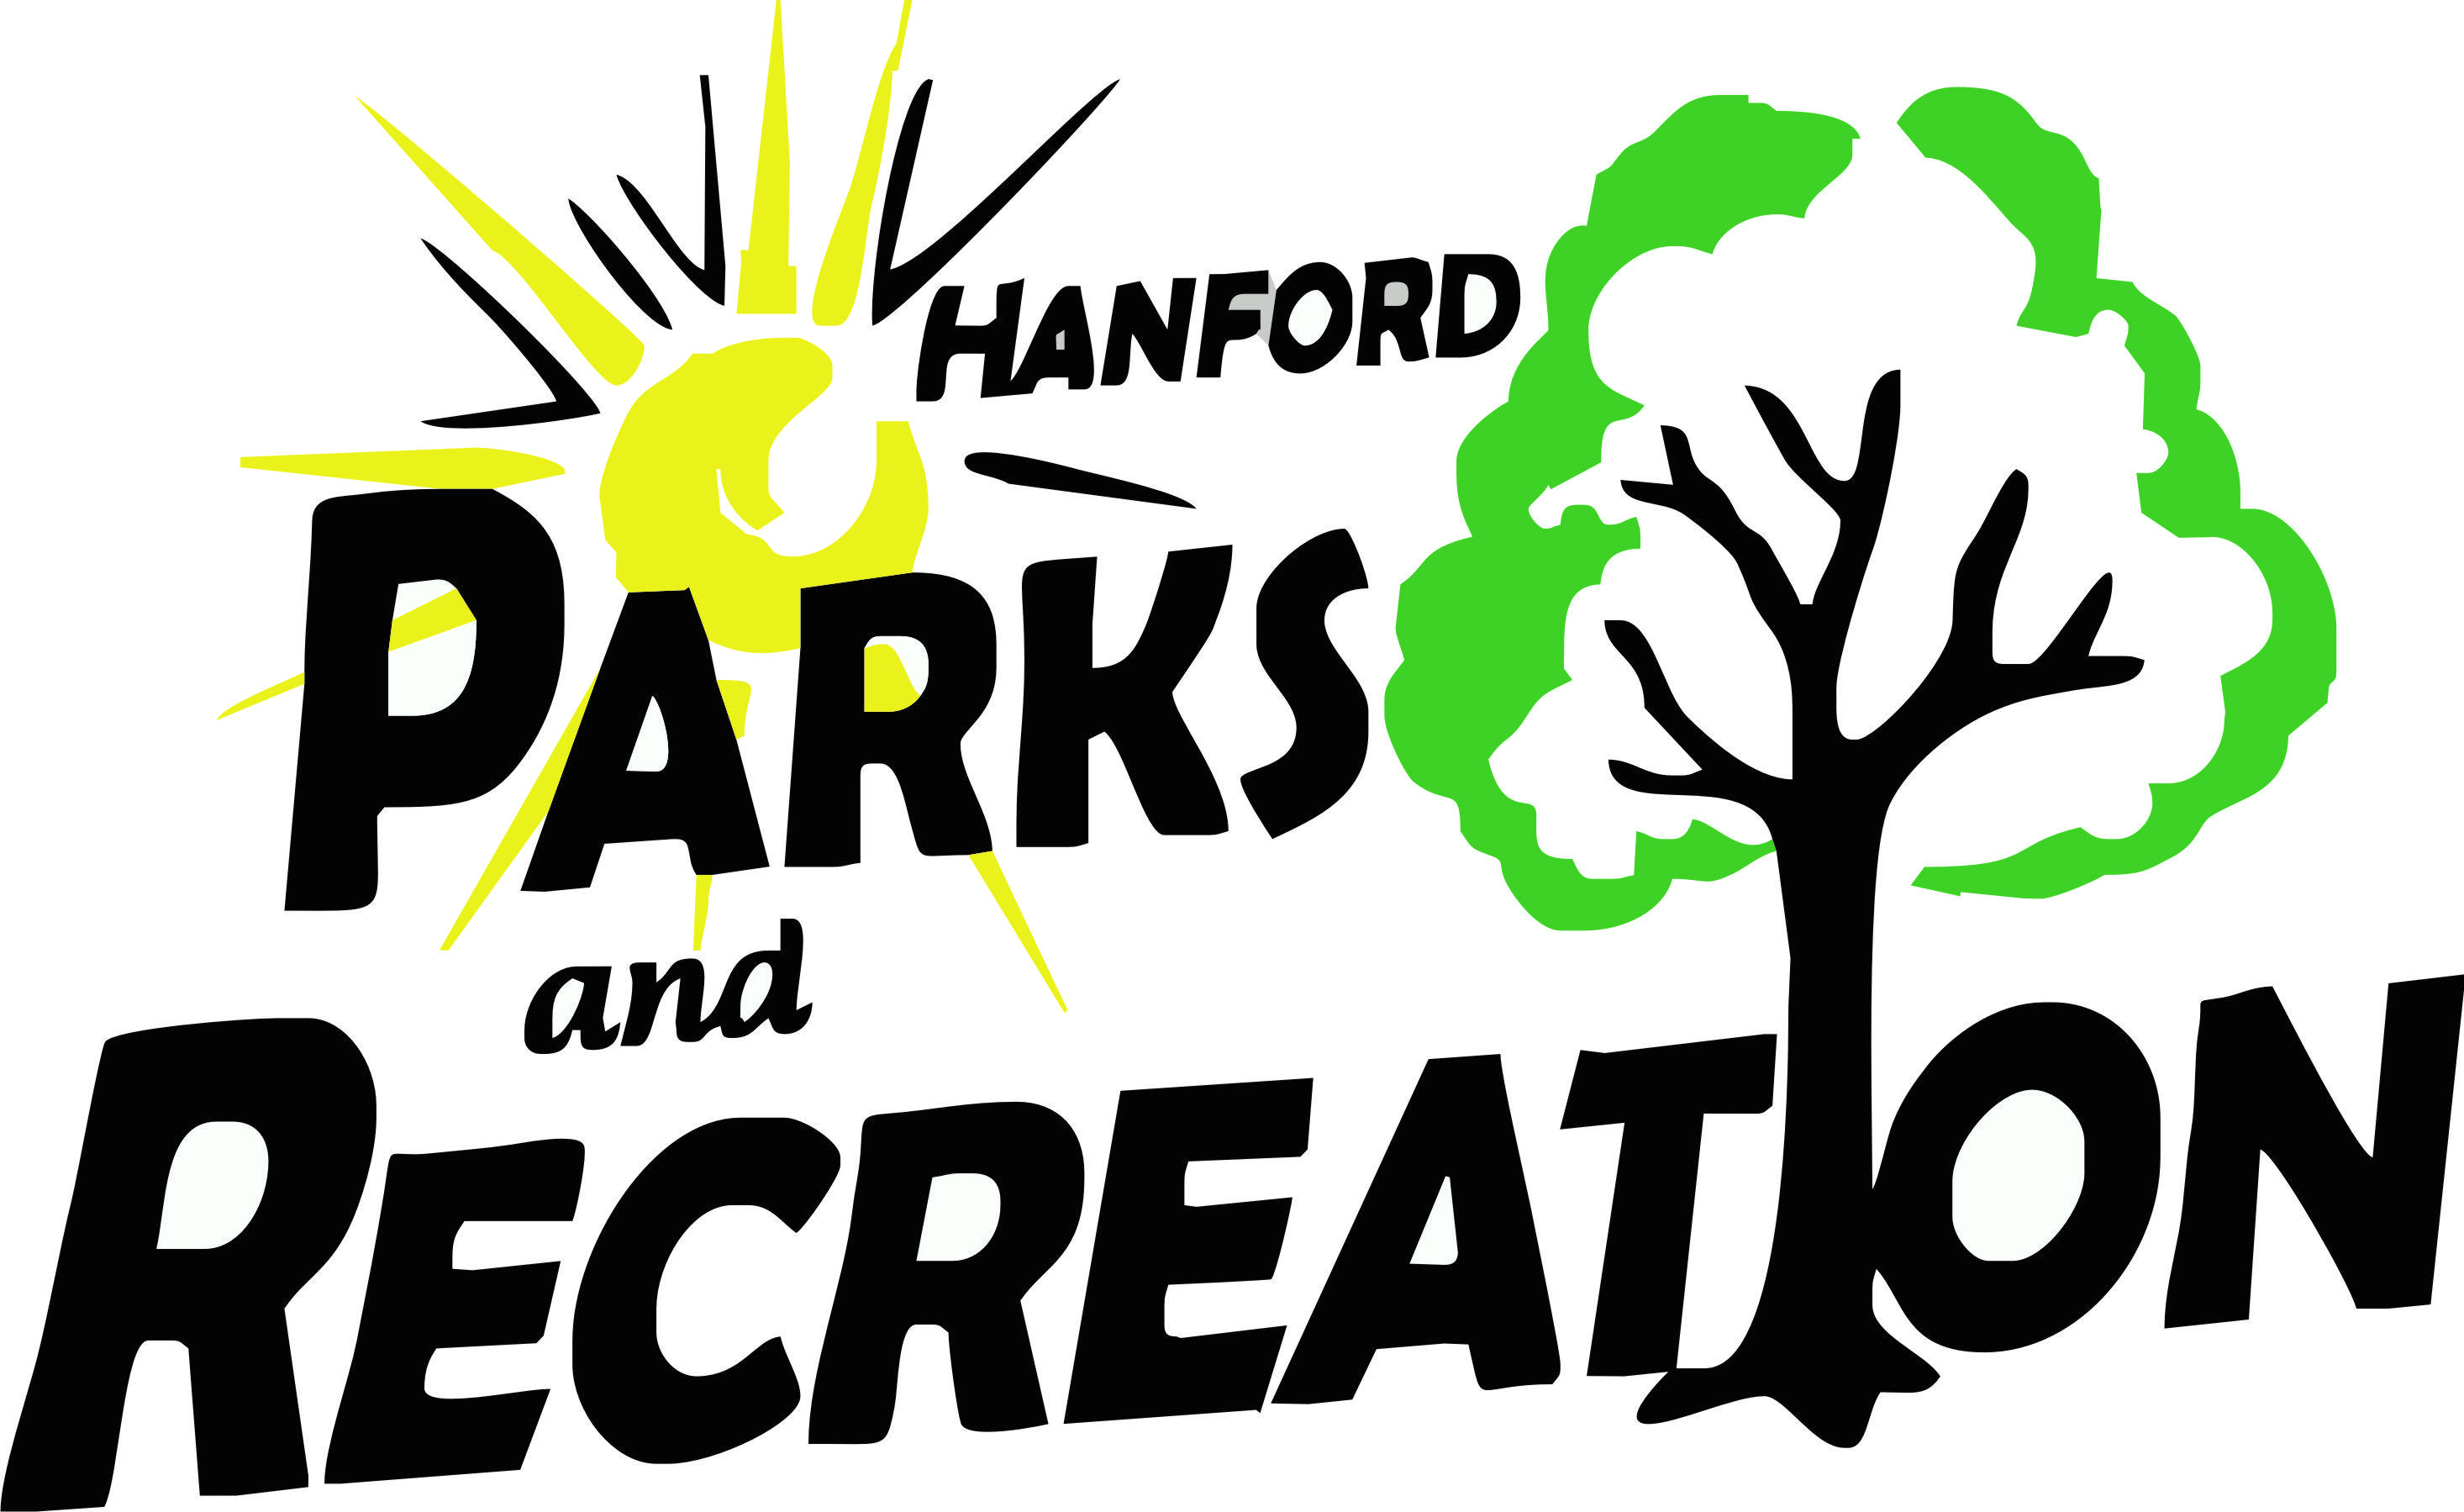 LA Parks Logo - Welcome to City of Hanford